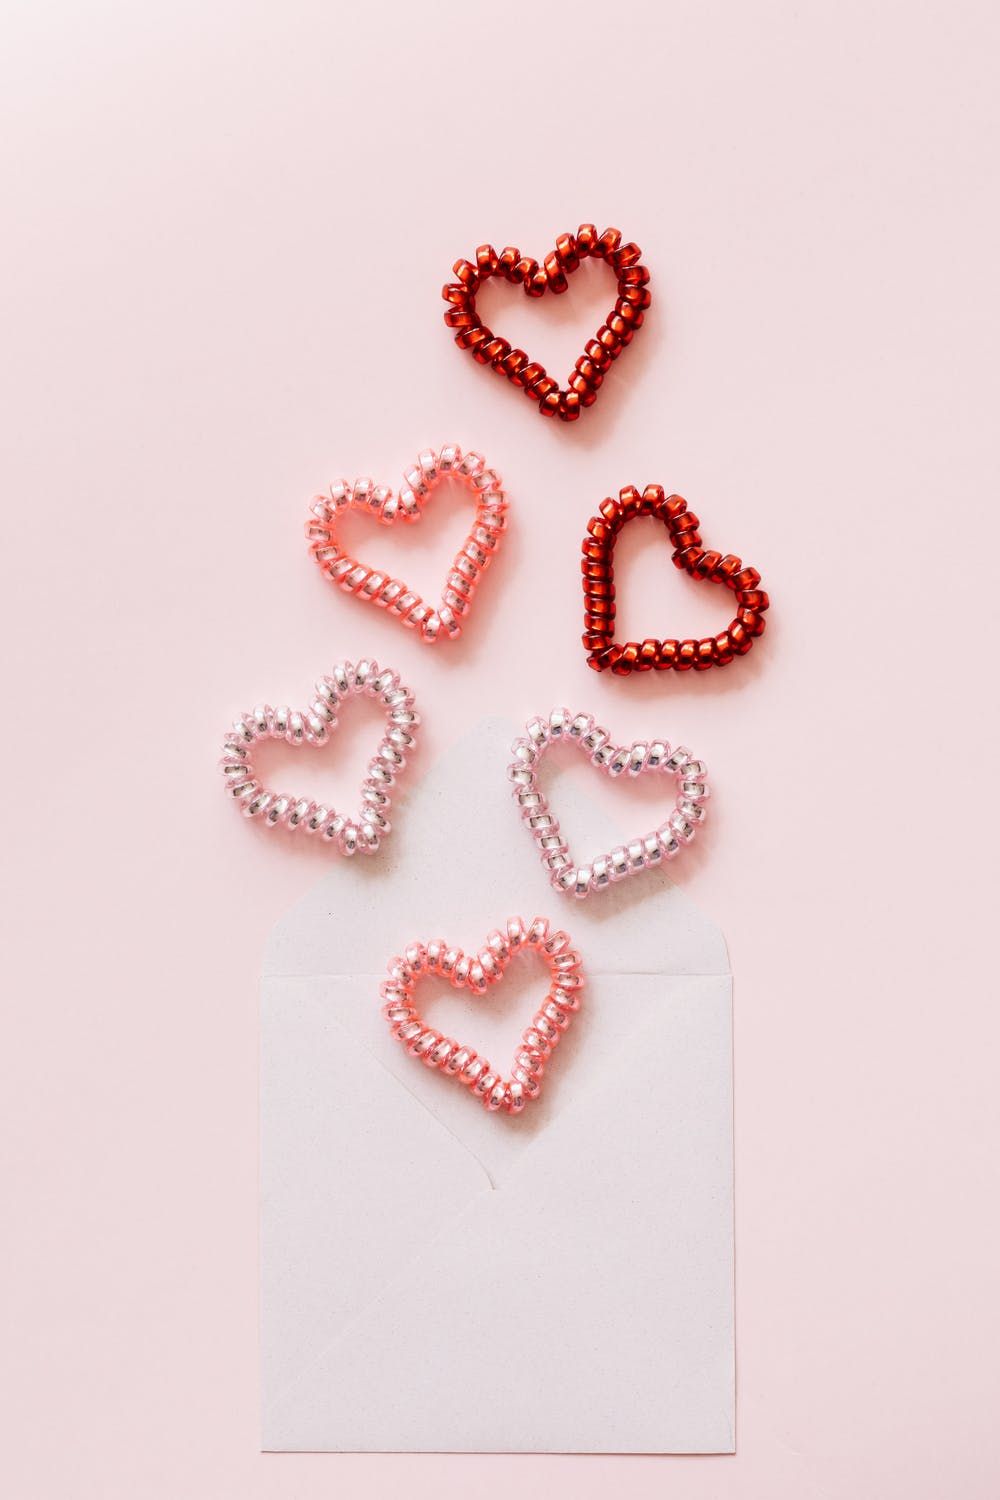 Cute Valentine's Day Wallpaper For iPhone (Free Download!). Valentines wallpaper iphone, Valentines wallpaper, Valentines